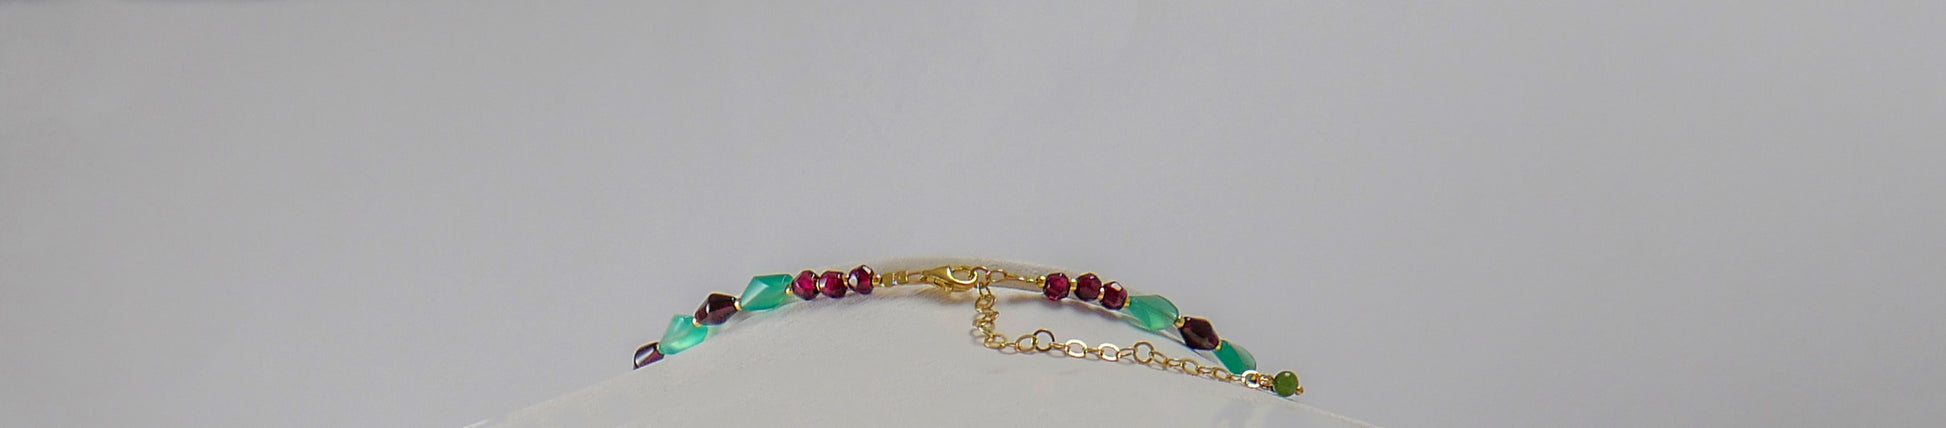 Green Agates, Garnets, Pearls & Gold Plated Silver Necklace - Katerina Roukouna